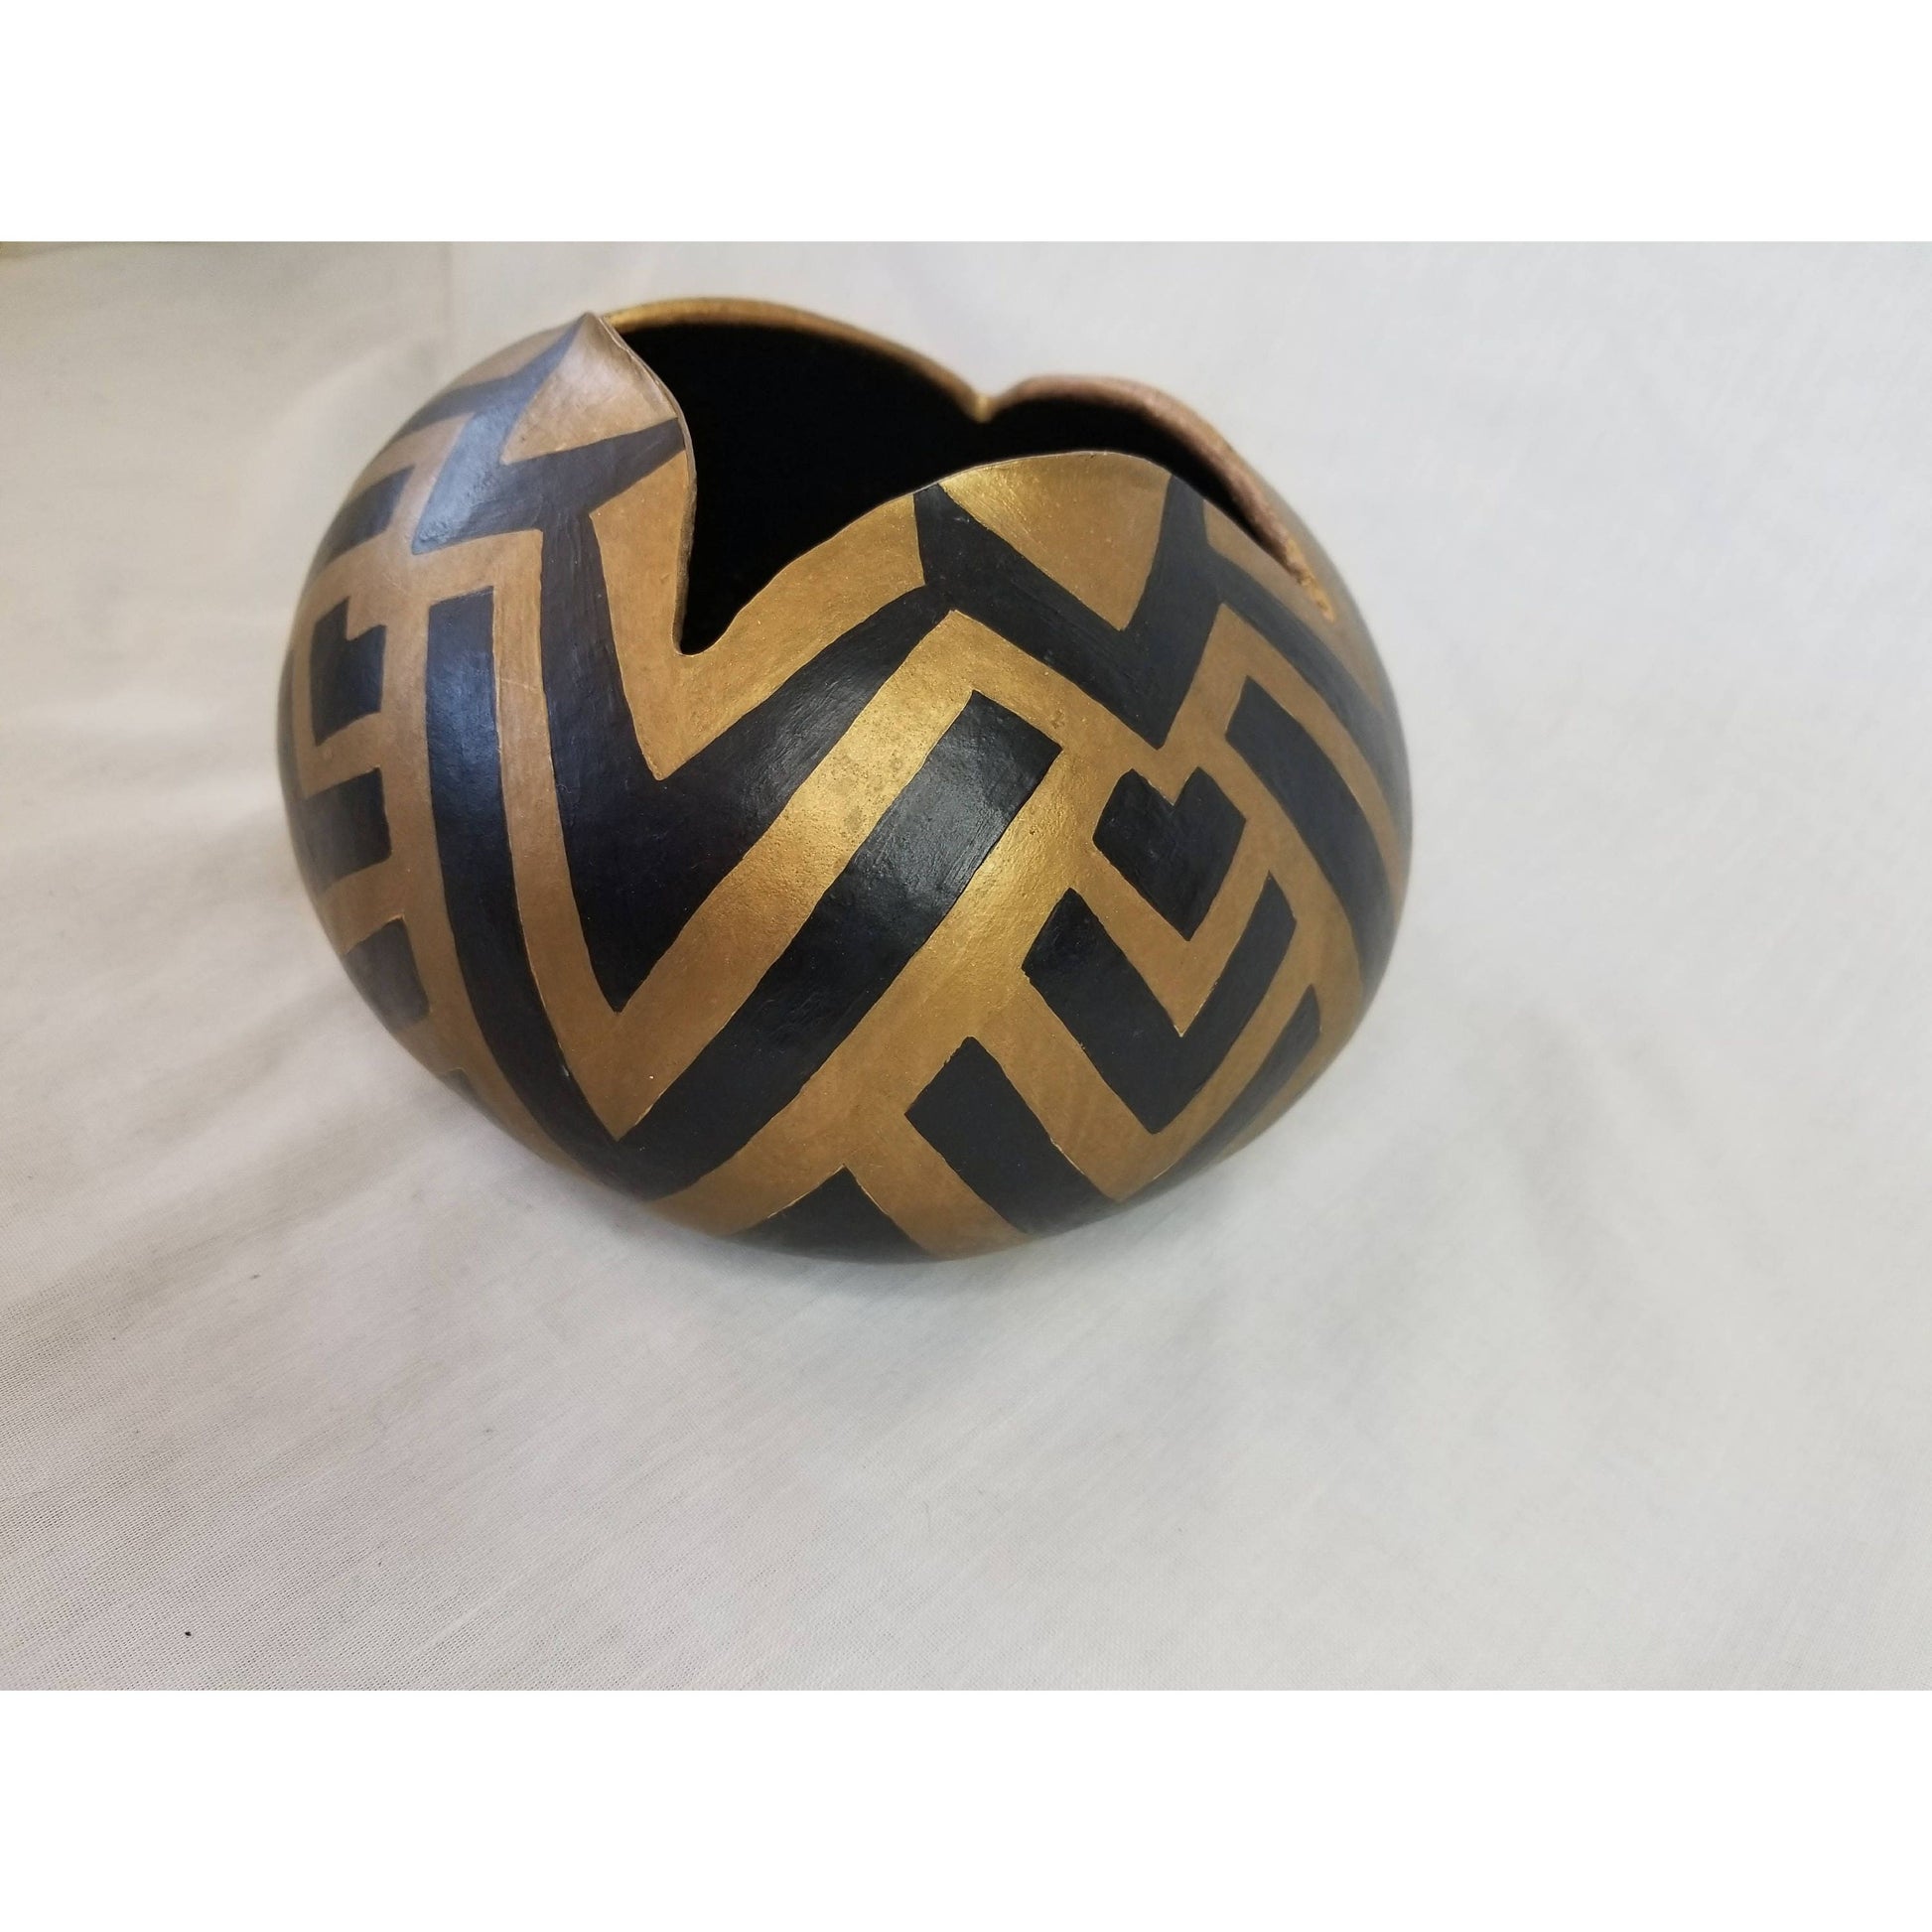 Tribal Gourd Bowl Artist Made ~ Hand Painted Gourd ~ Signed "M. Landsiedel" ~ Tribal ~ Geometric ~ Home Décor